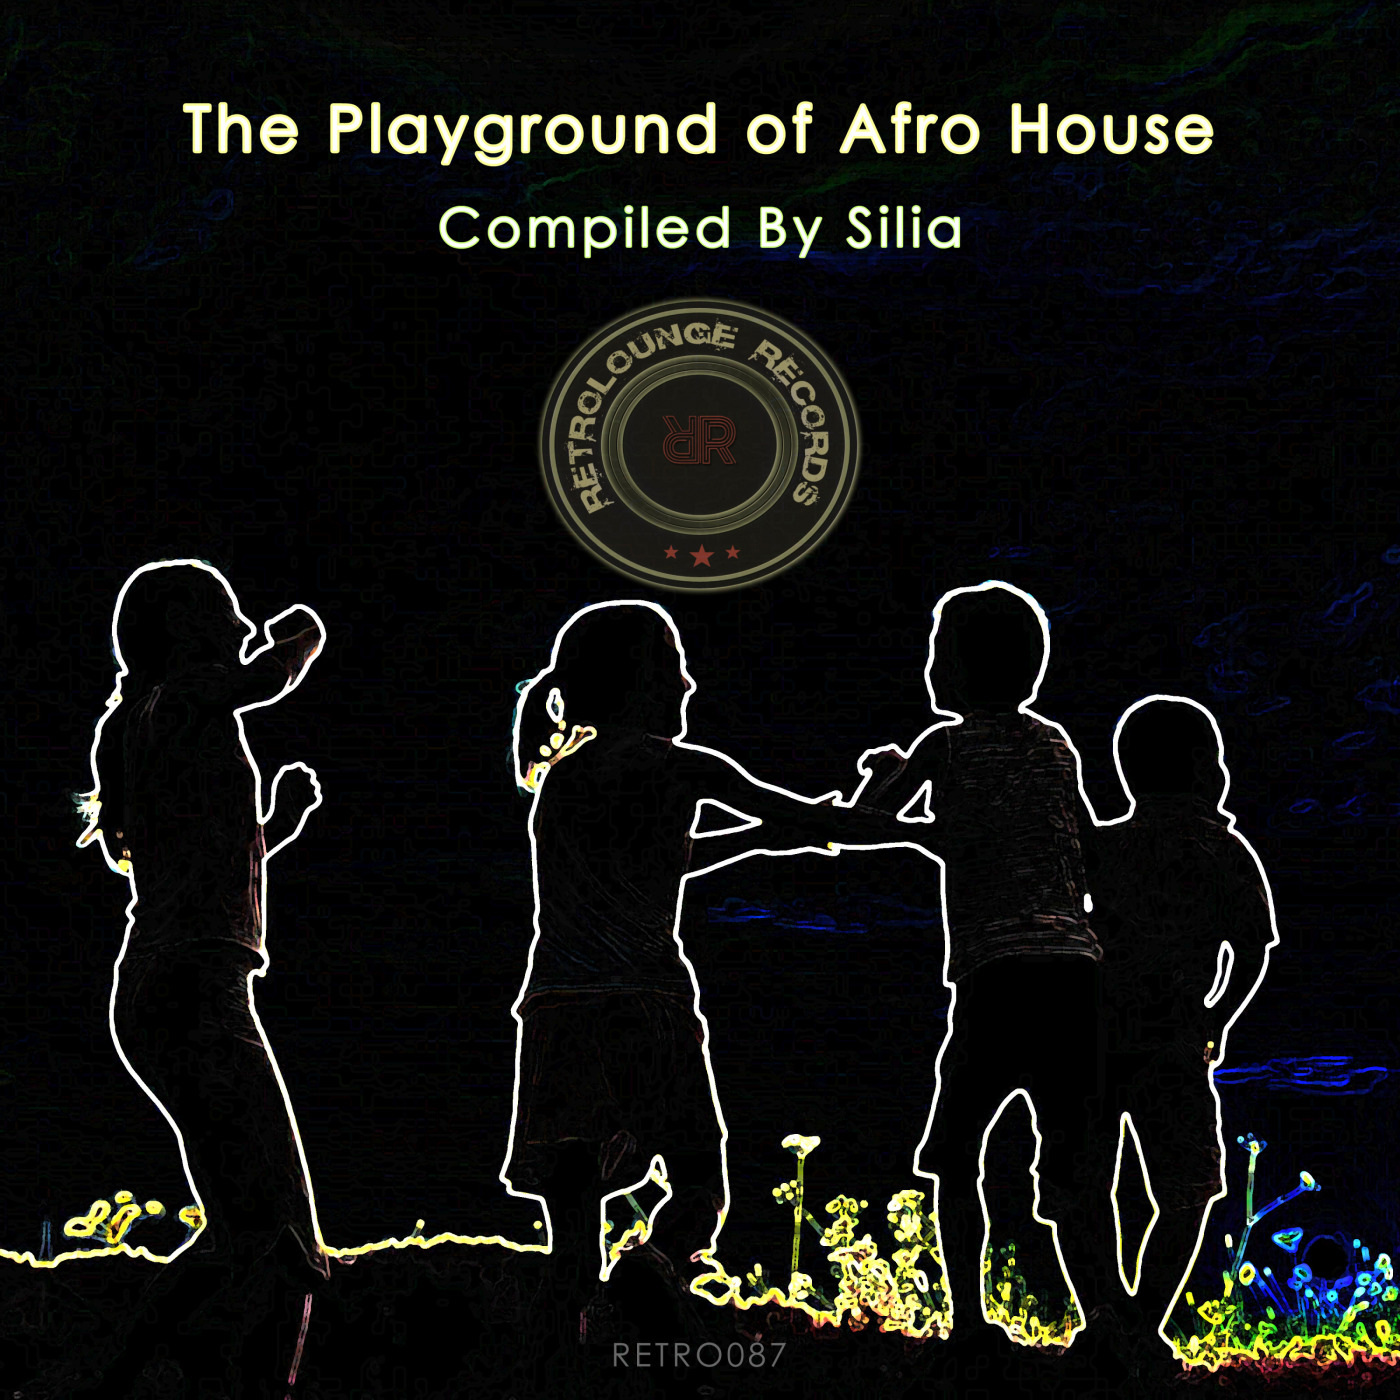 VA - The Playground of Afro House (Compiled by Silia) / Retrolounge Records